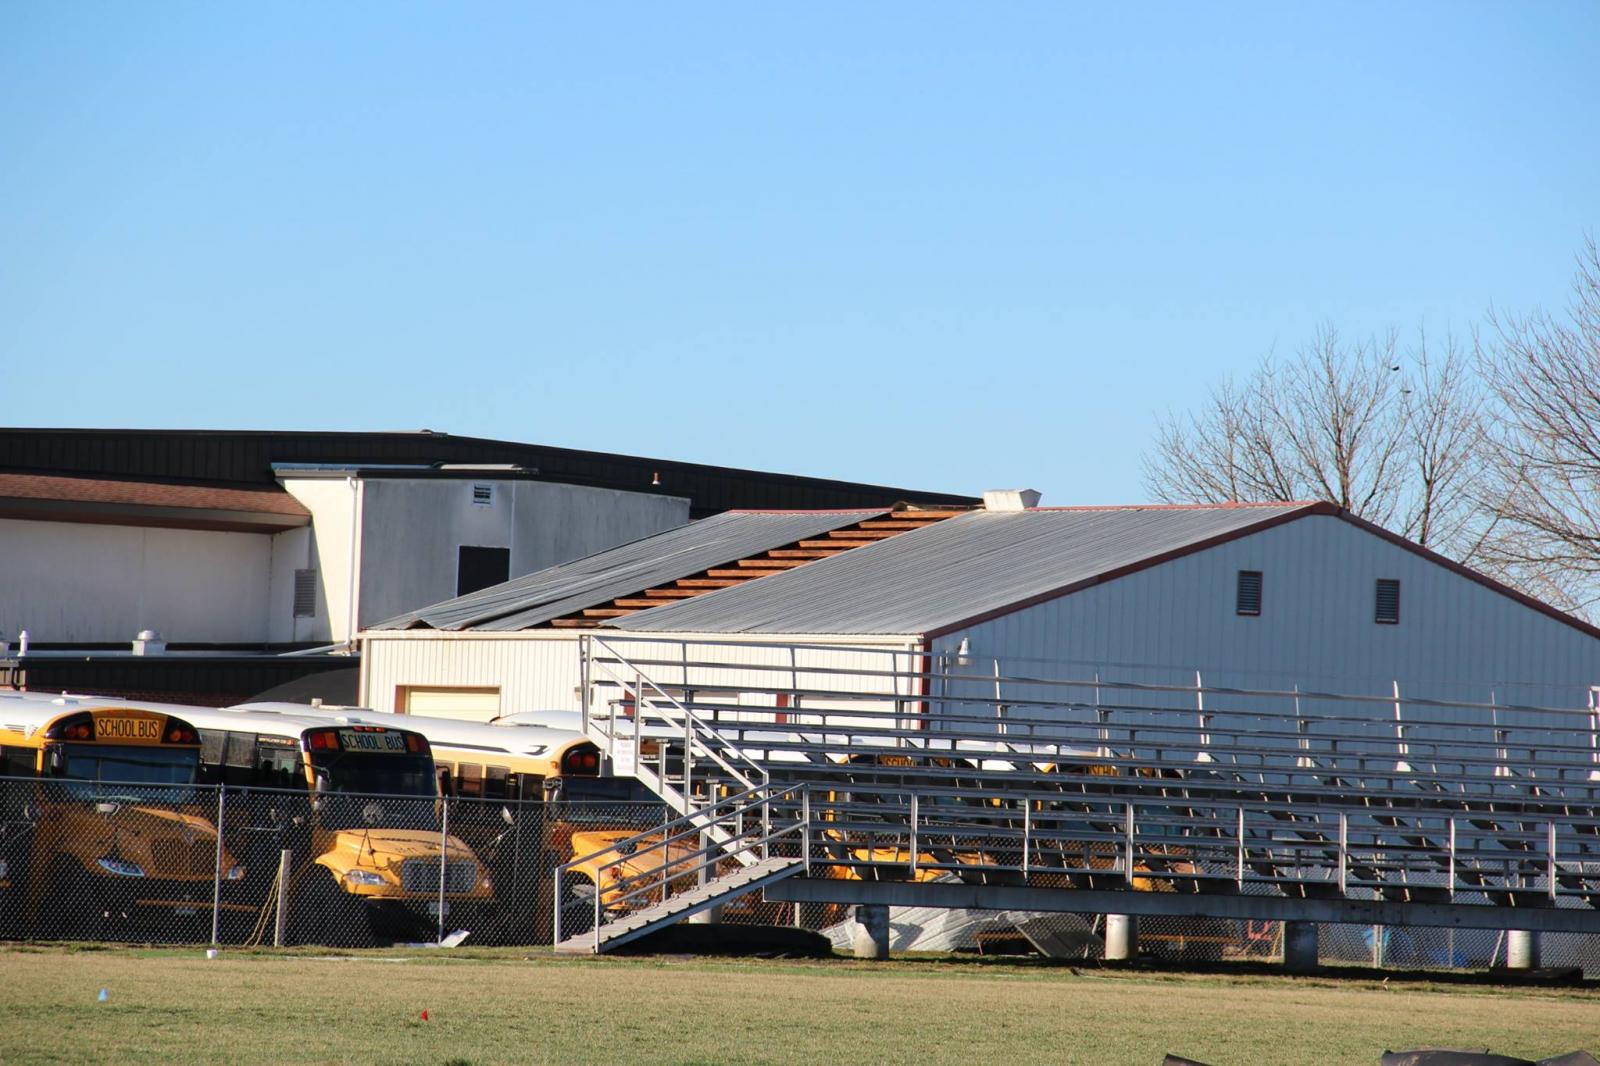 Photo of partial roof damage to an outbuilding at South Shelby High School.